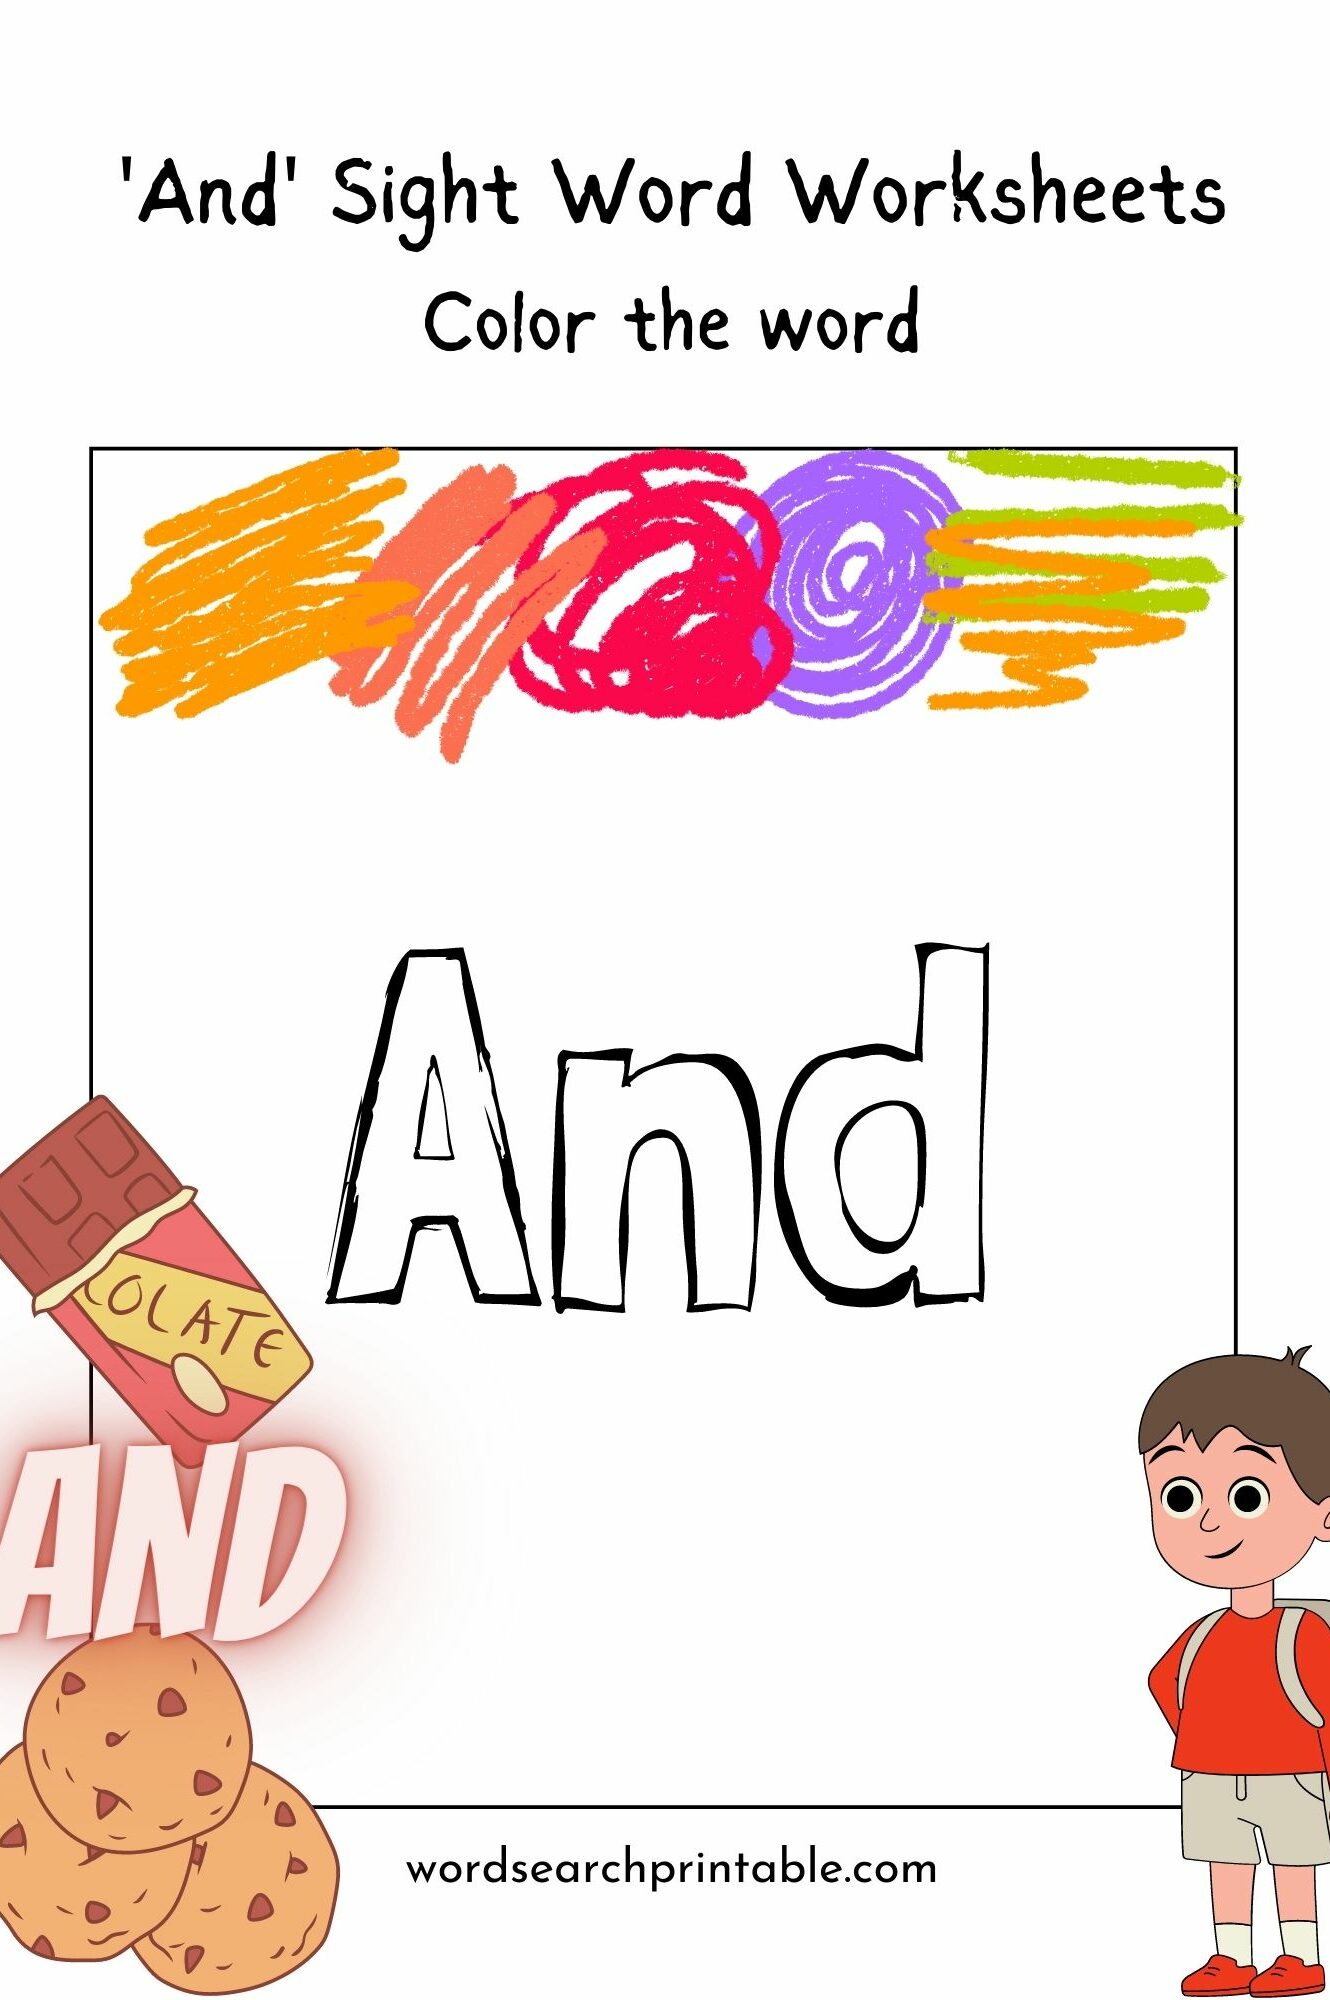 And sight word worksheet - color the word 'and'